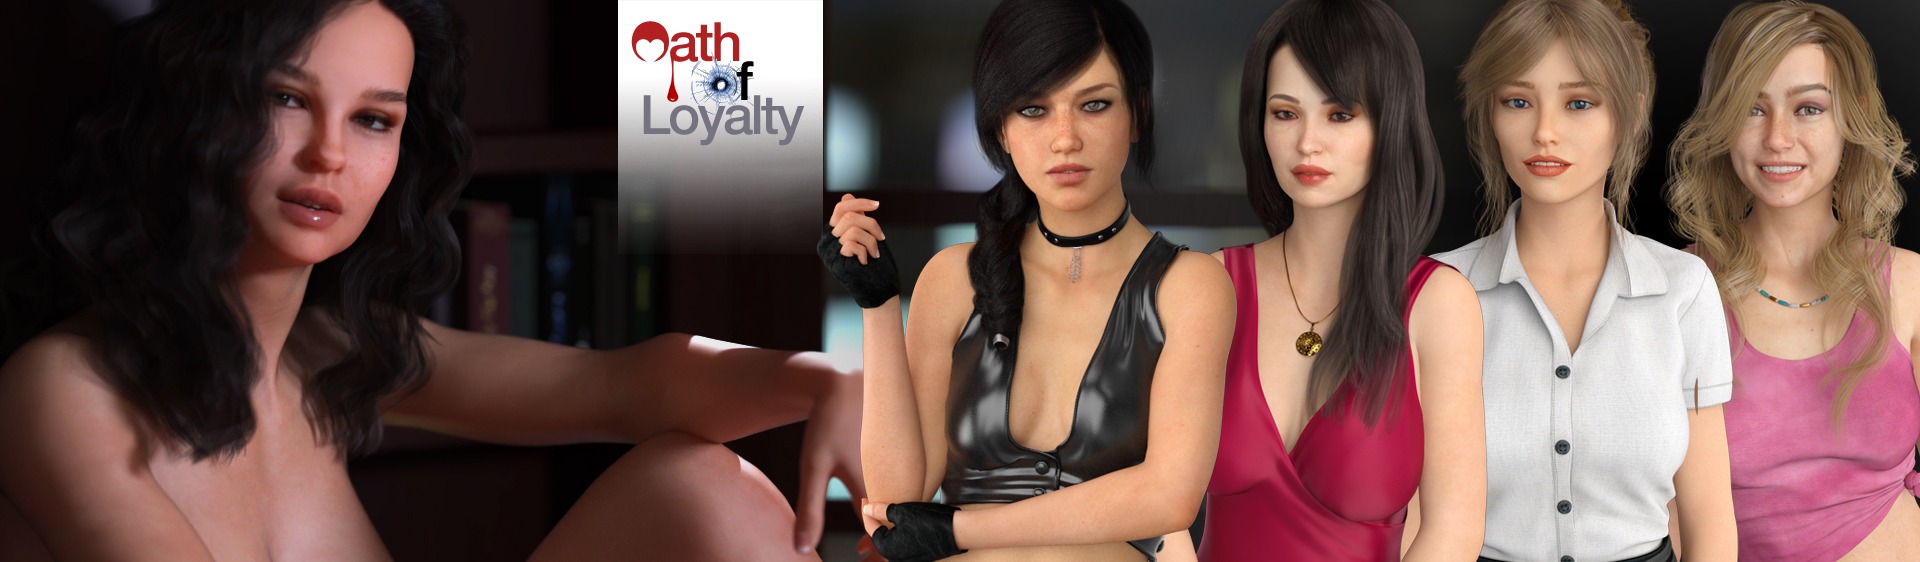 Oath of Loyalty [HSA GAMES]